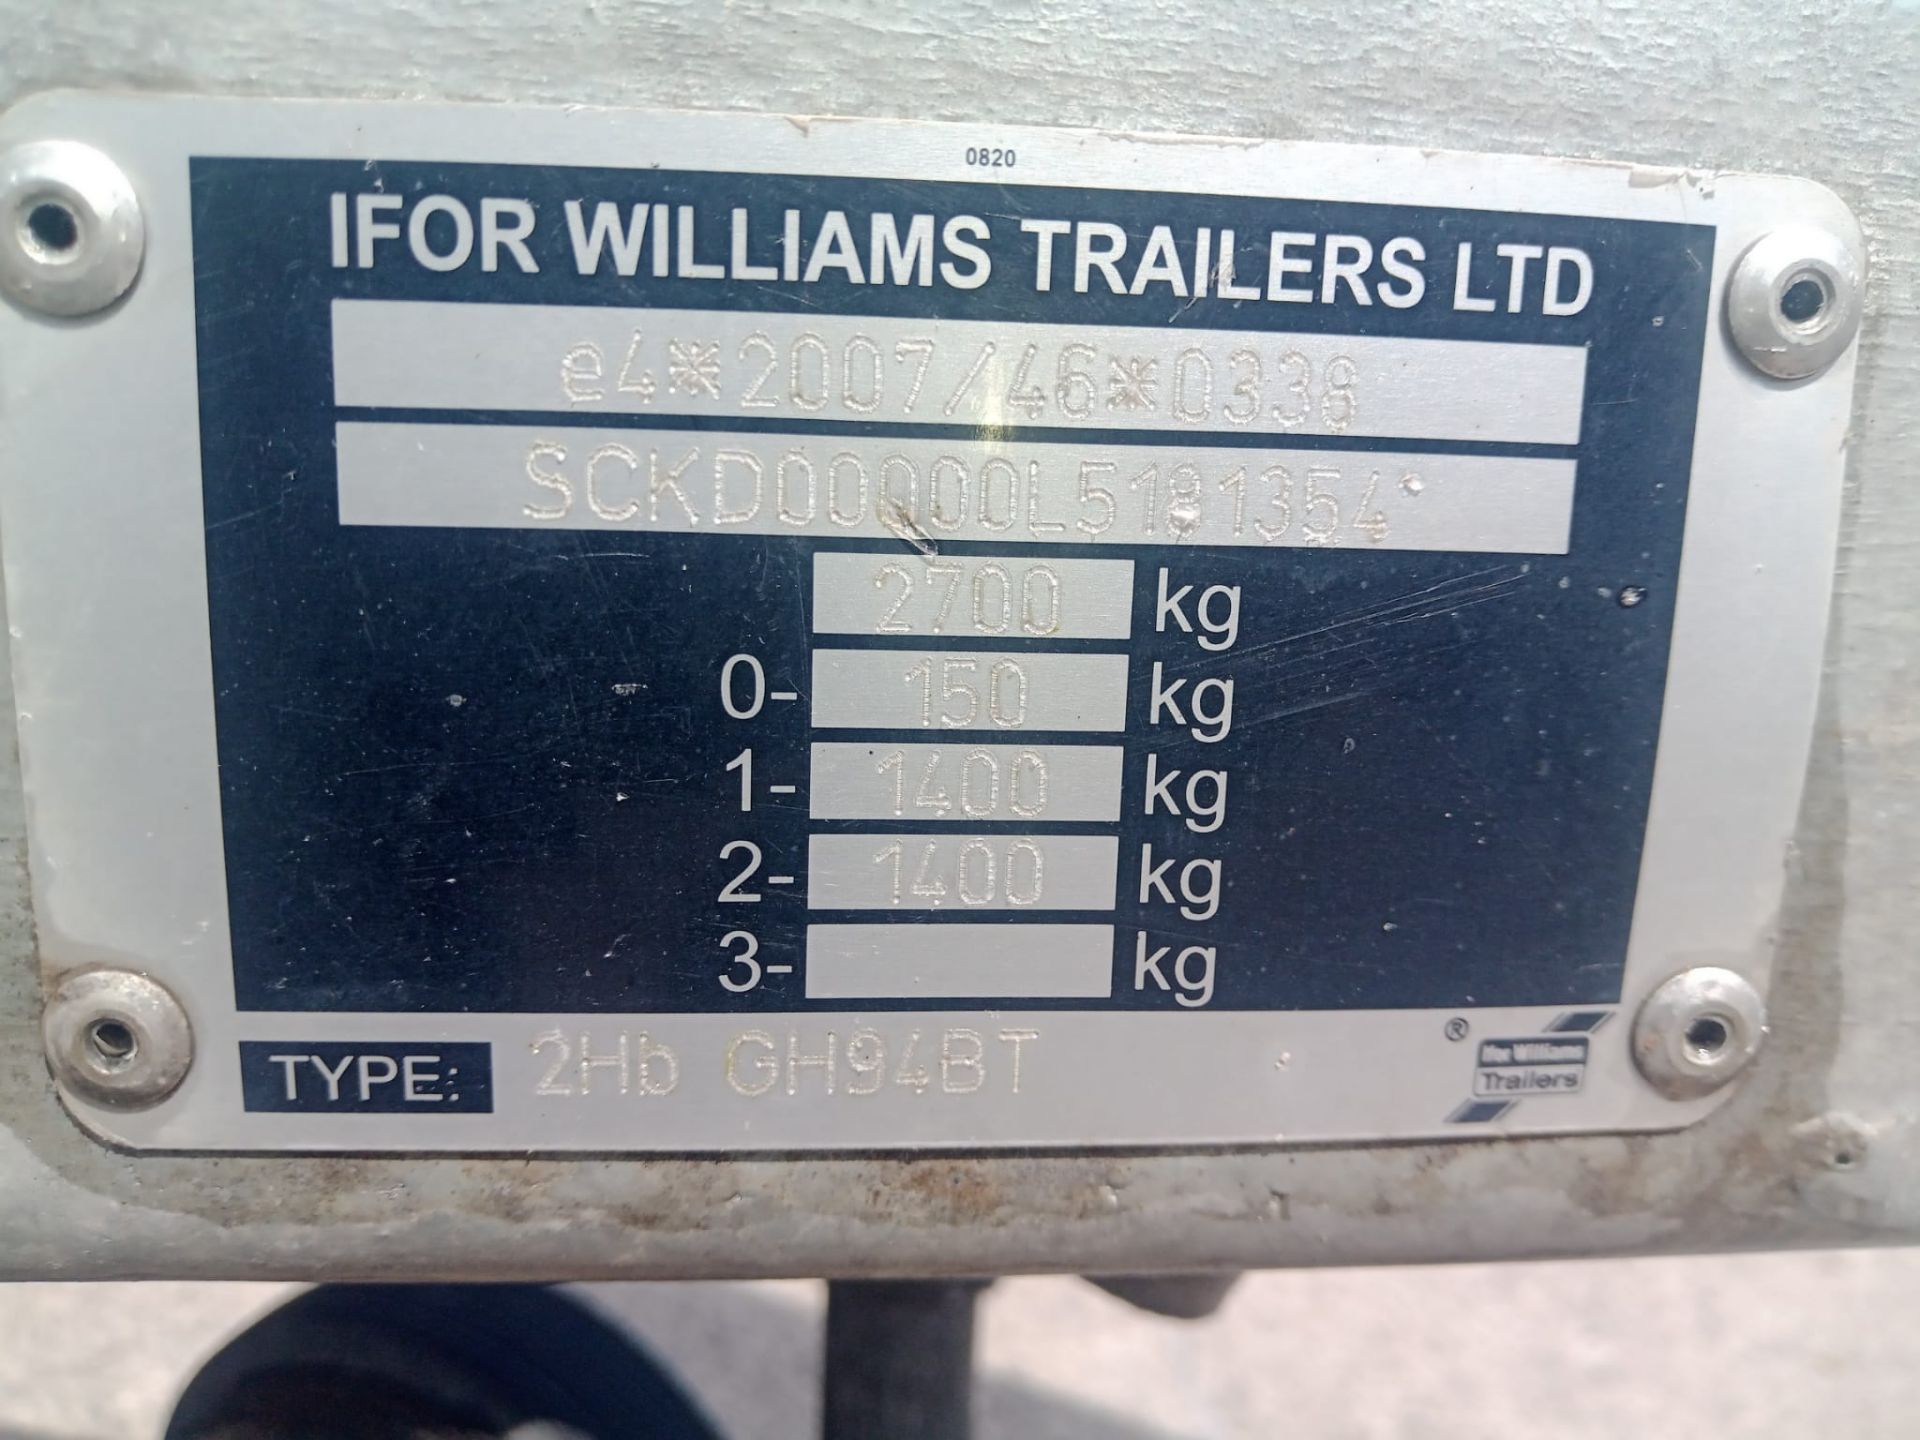 Used Ifor Williams GH94BT - Image 5 of 7